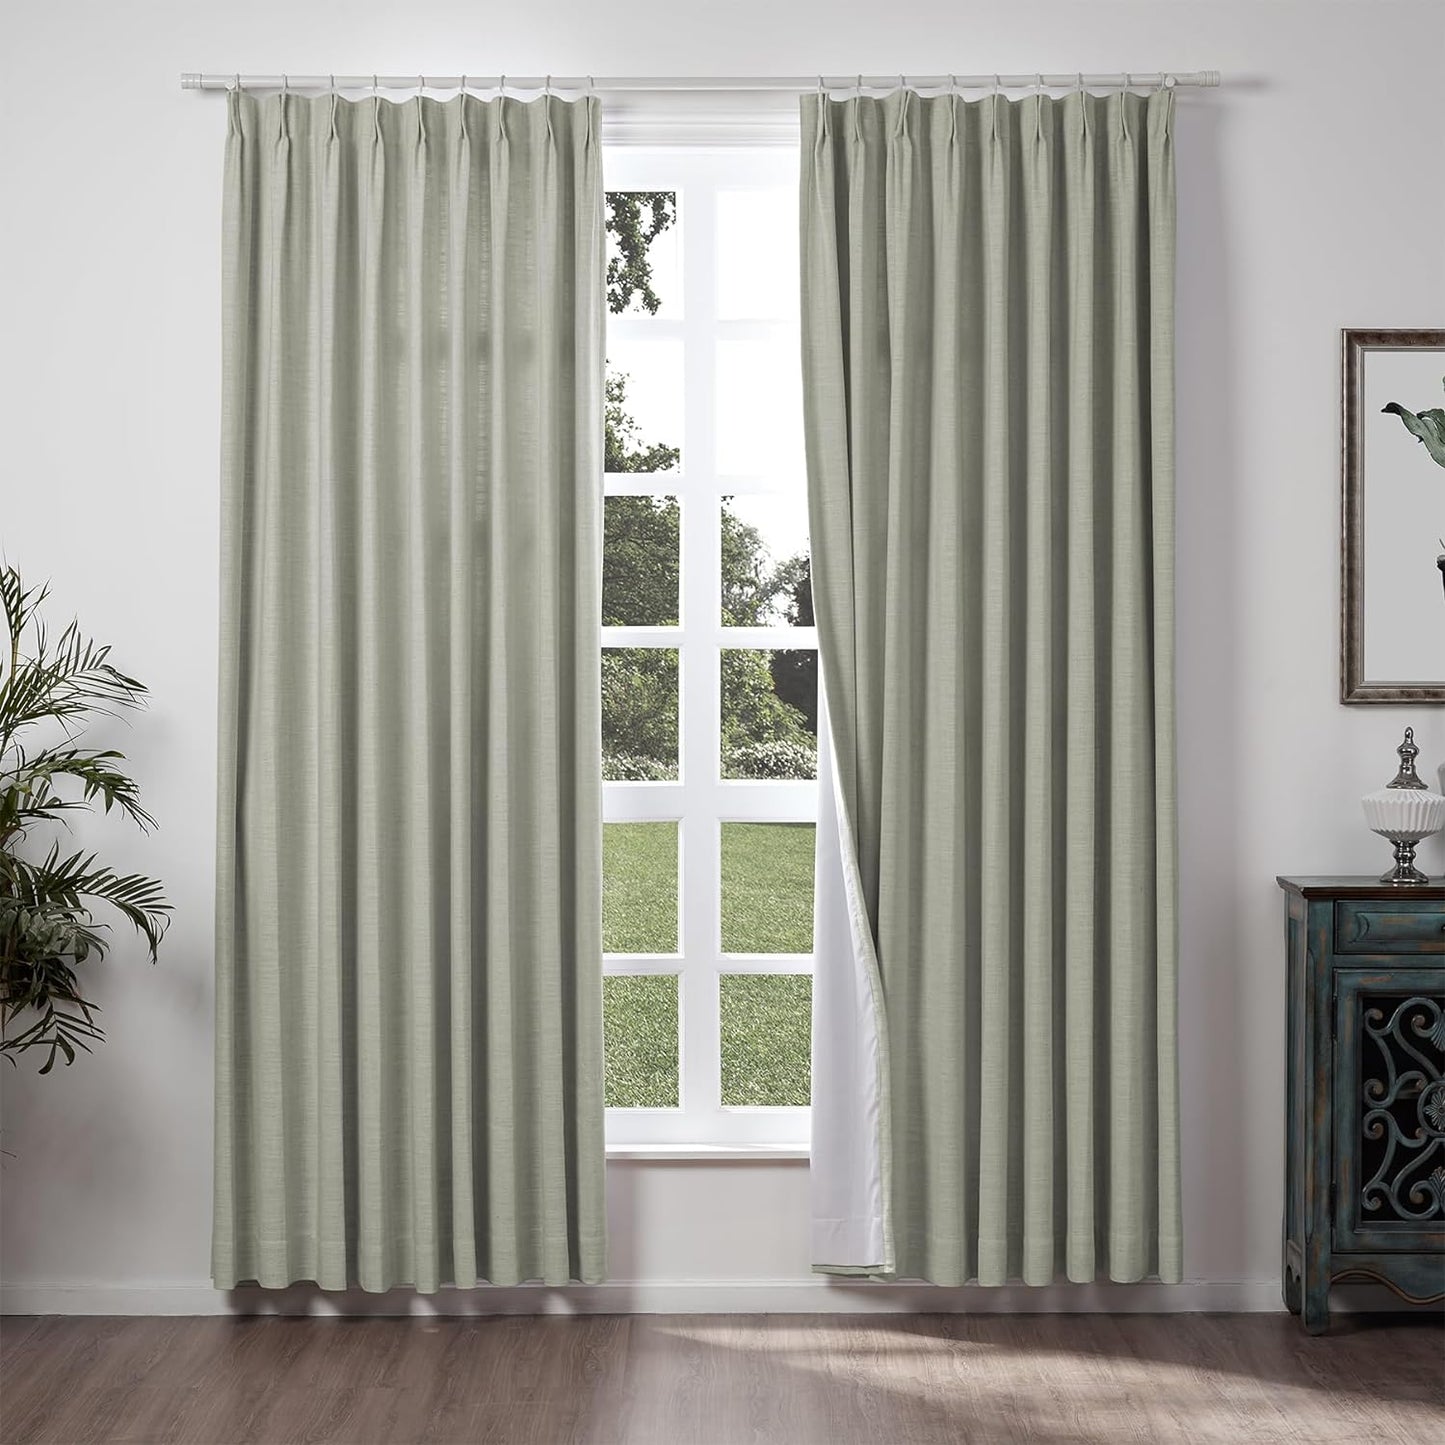 Chadmade 50" W X 84" L Polyester Linen Drape with Blackout Lining Pinch Pleat Curtain for Sliding Door Patio Door Living Room Bedroom, (1 Panel) Beige White Liz Collection  ChadMade Light Gray (11) 50Wx84L 